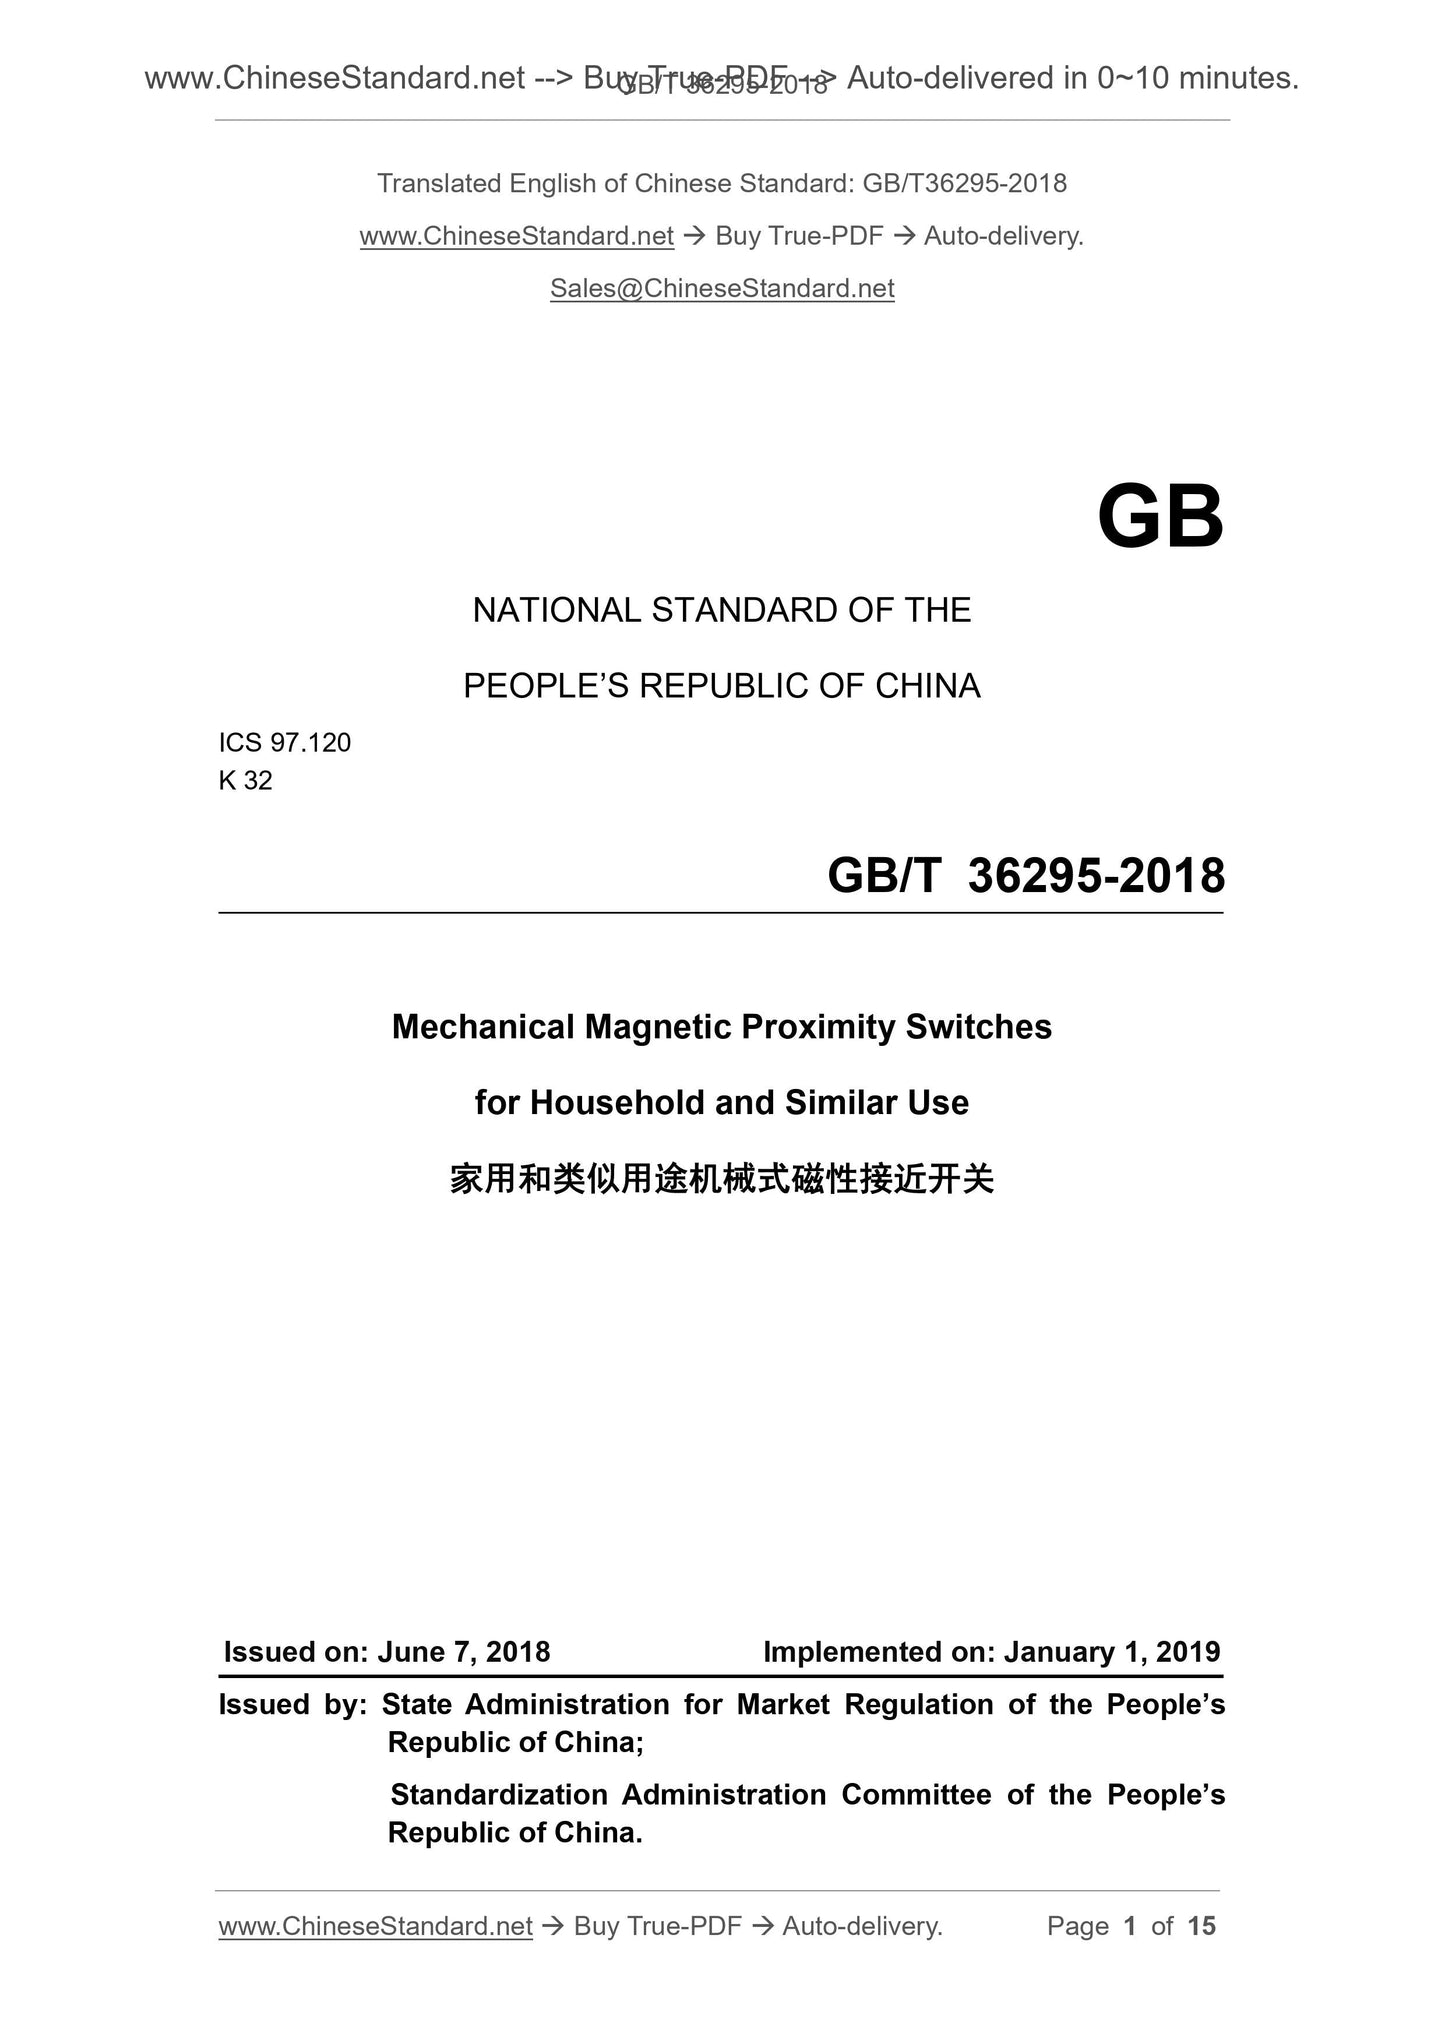 GB/T 36295-2018 Page 1